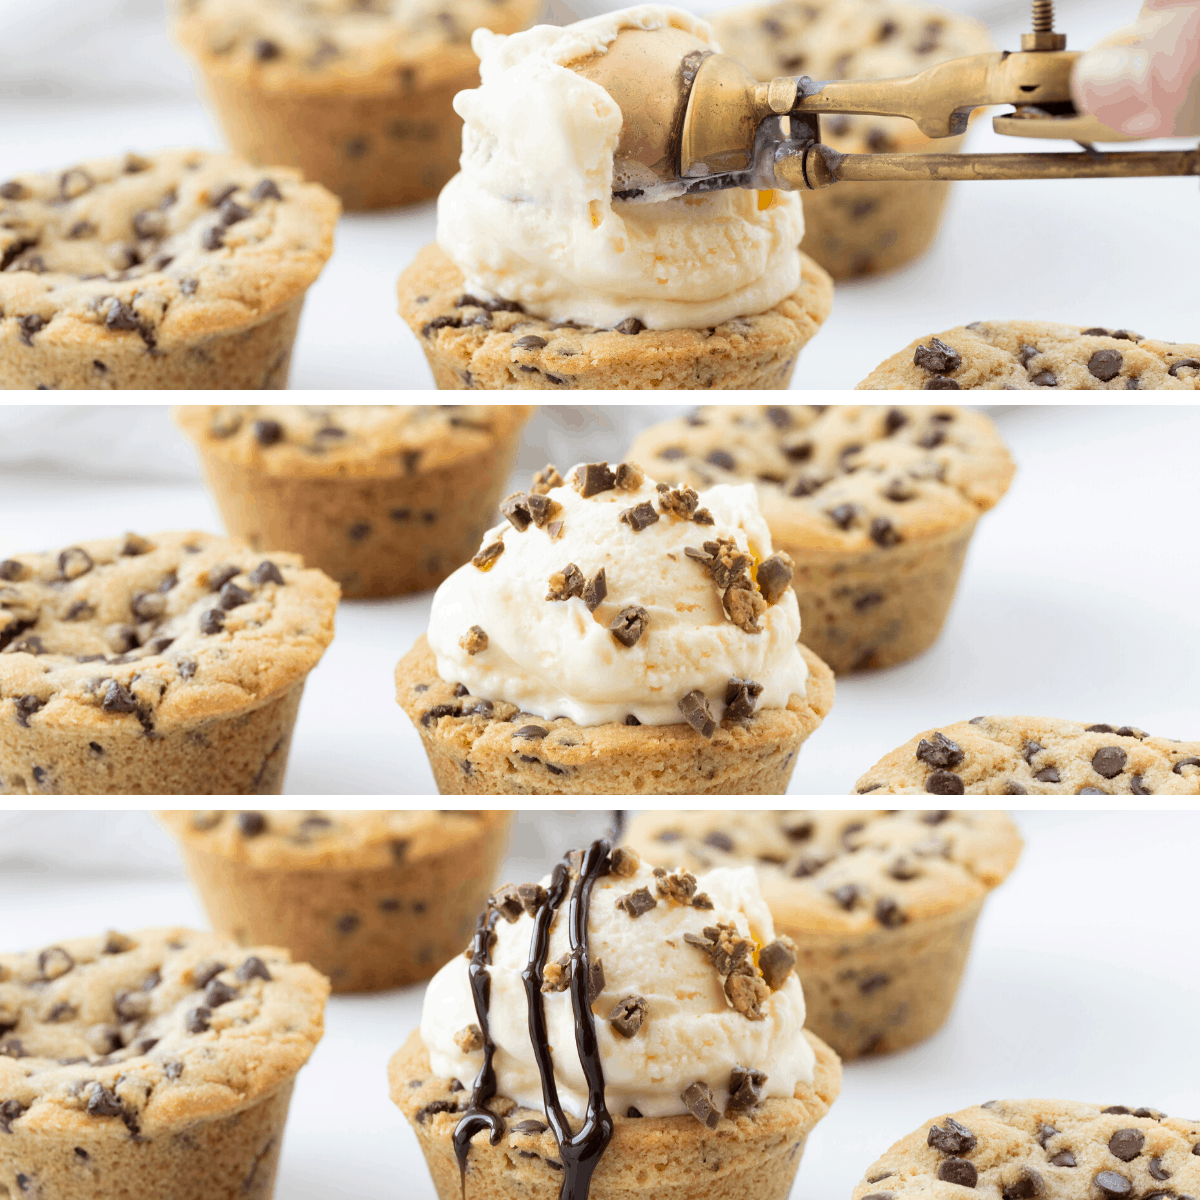 3 images in collage showing how to add ice cream, chopped Reese's peanut butter cups, and hot fudge to a chocolate chip cookie cup